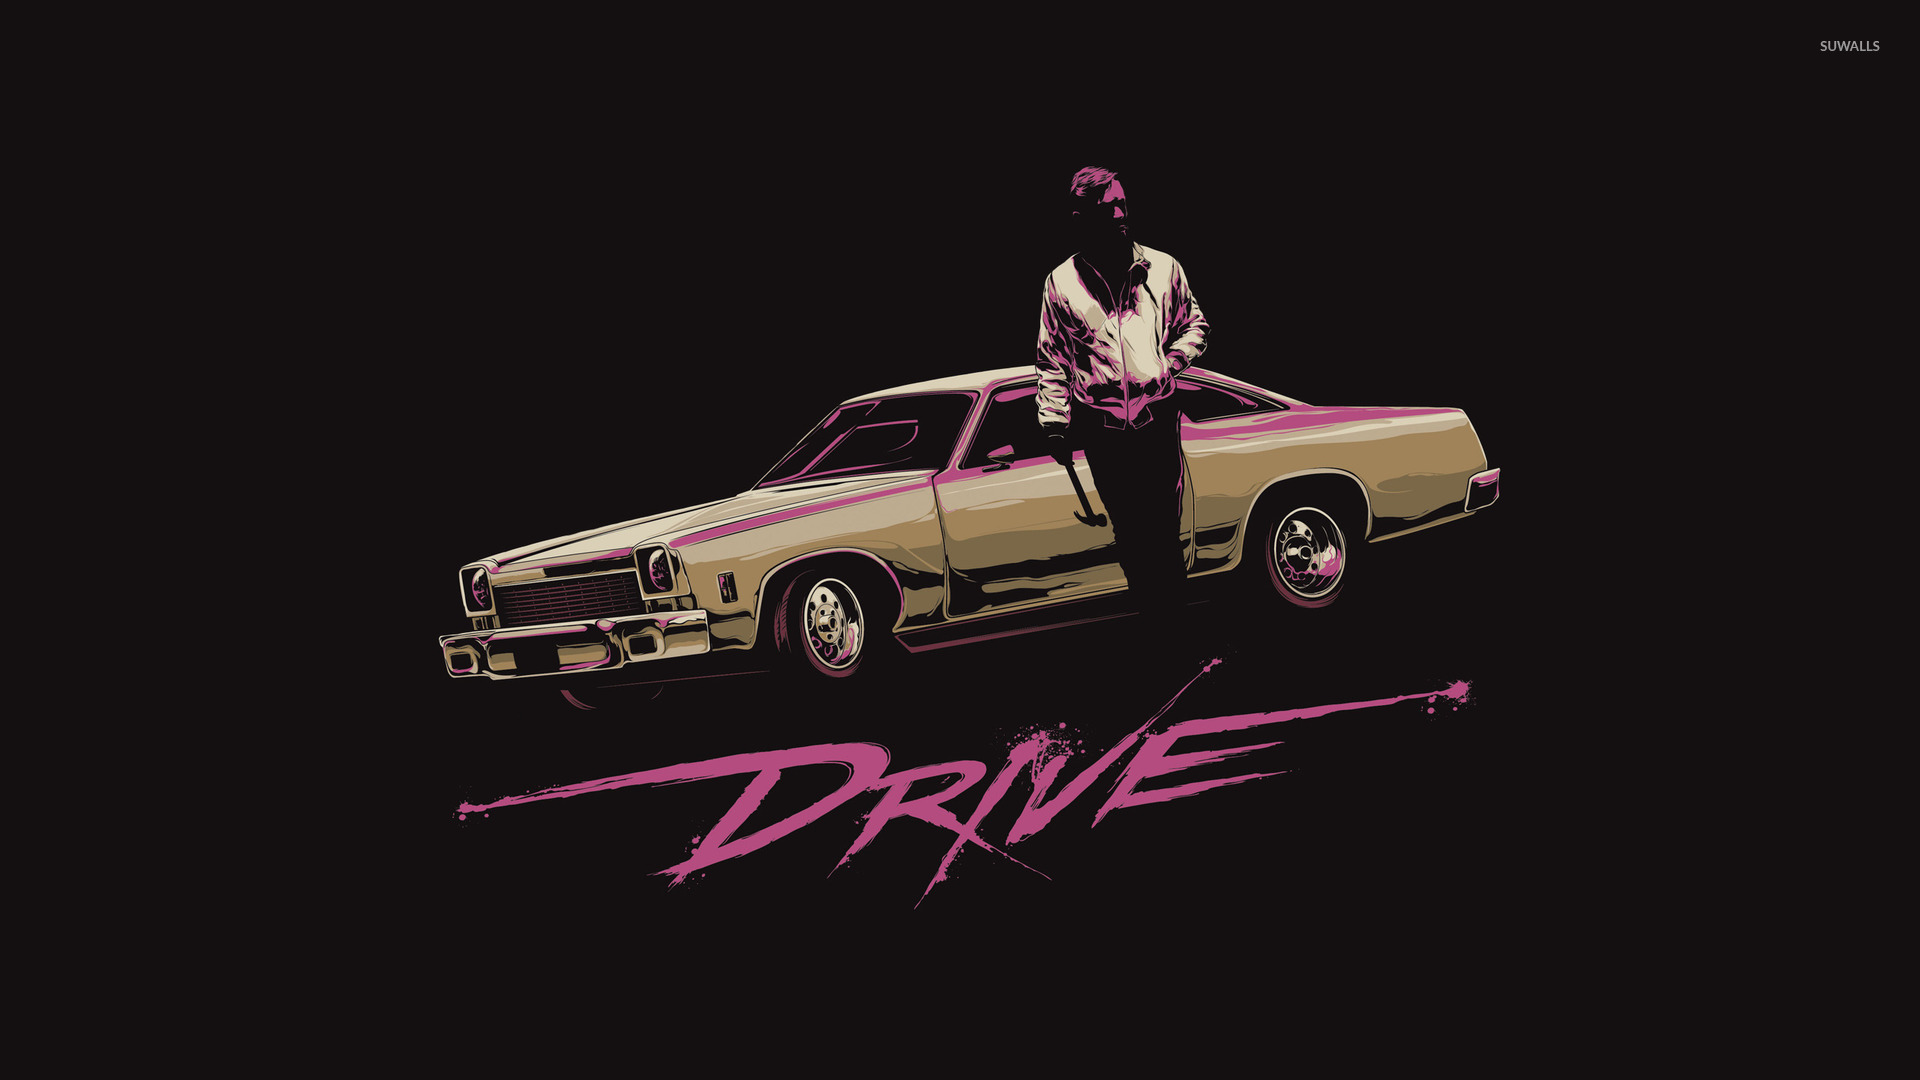 Drive wallpaper   Movie wallpapers   31421